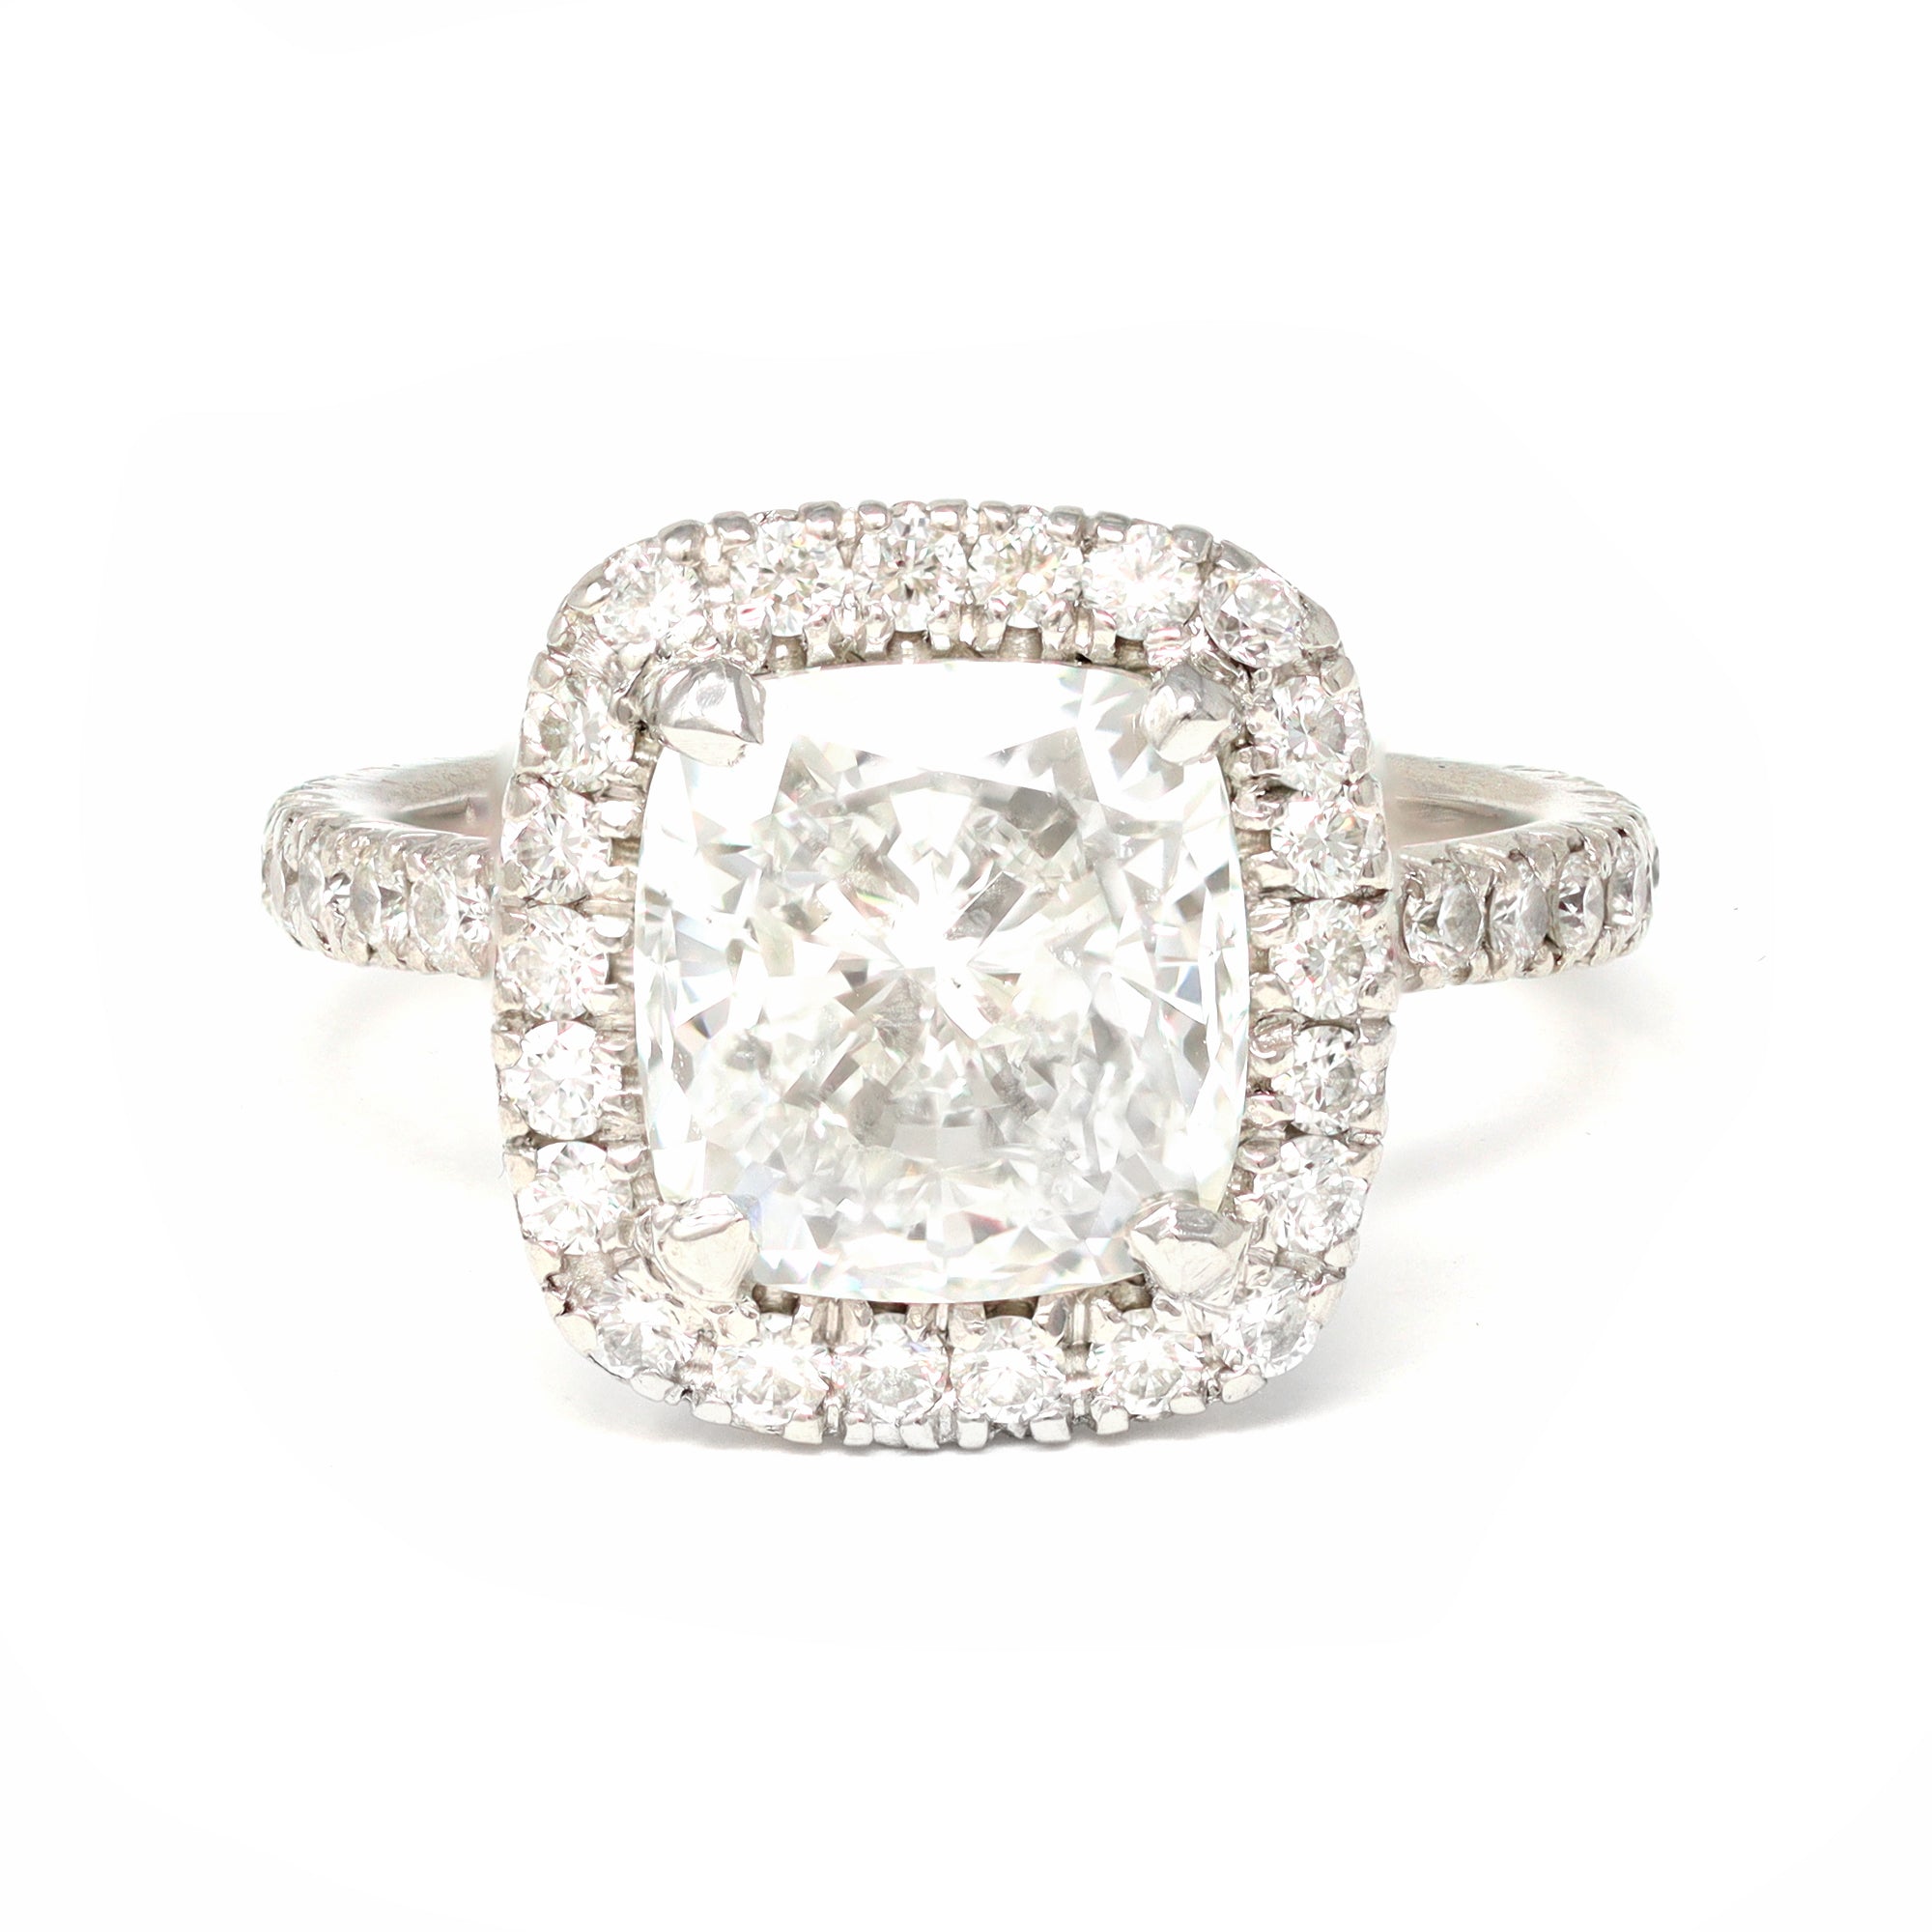 GIA Certified 3.07 Cushion Cut Solitaire Diamond Halo Ring in Platinum top view